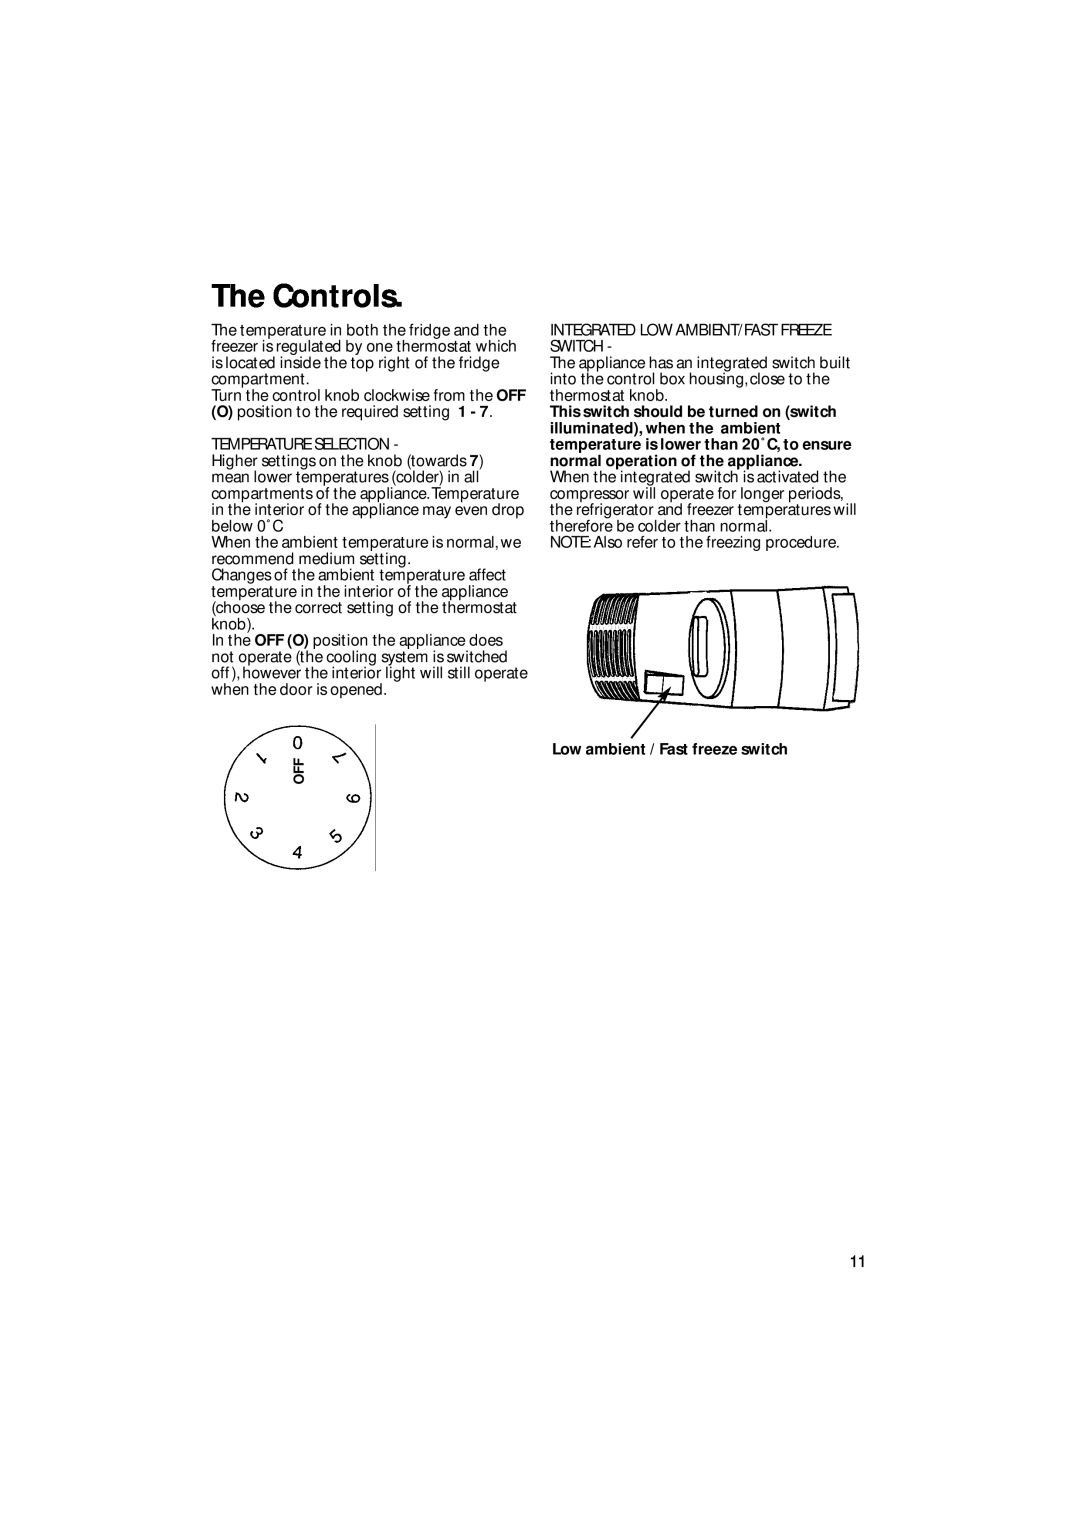 Hotpoint BM10, BM21 manual The Controls, Low ambient / Fast freeze switch 